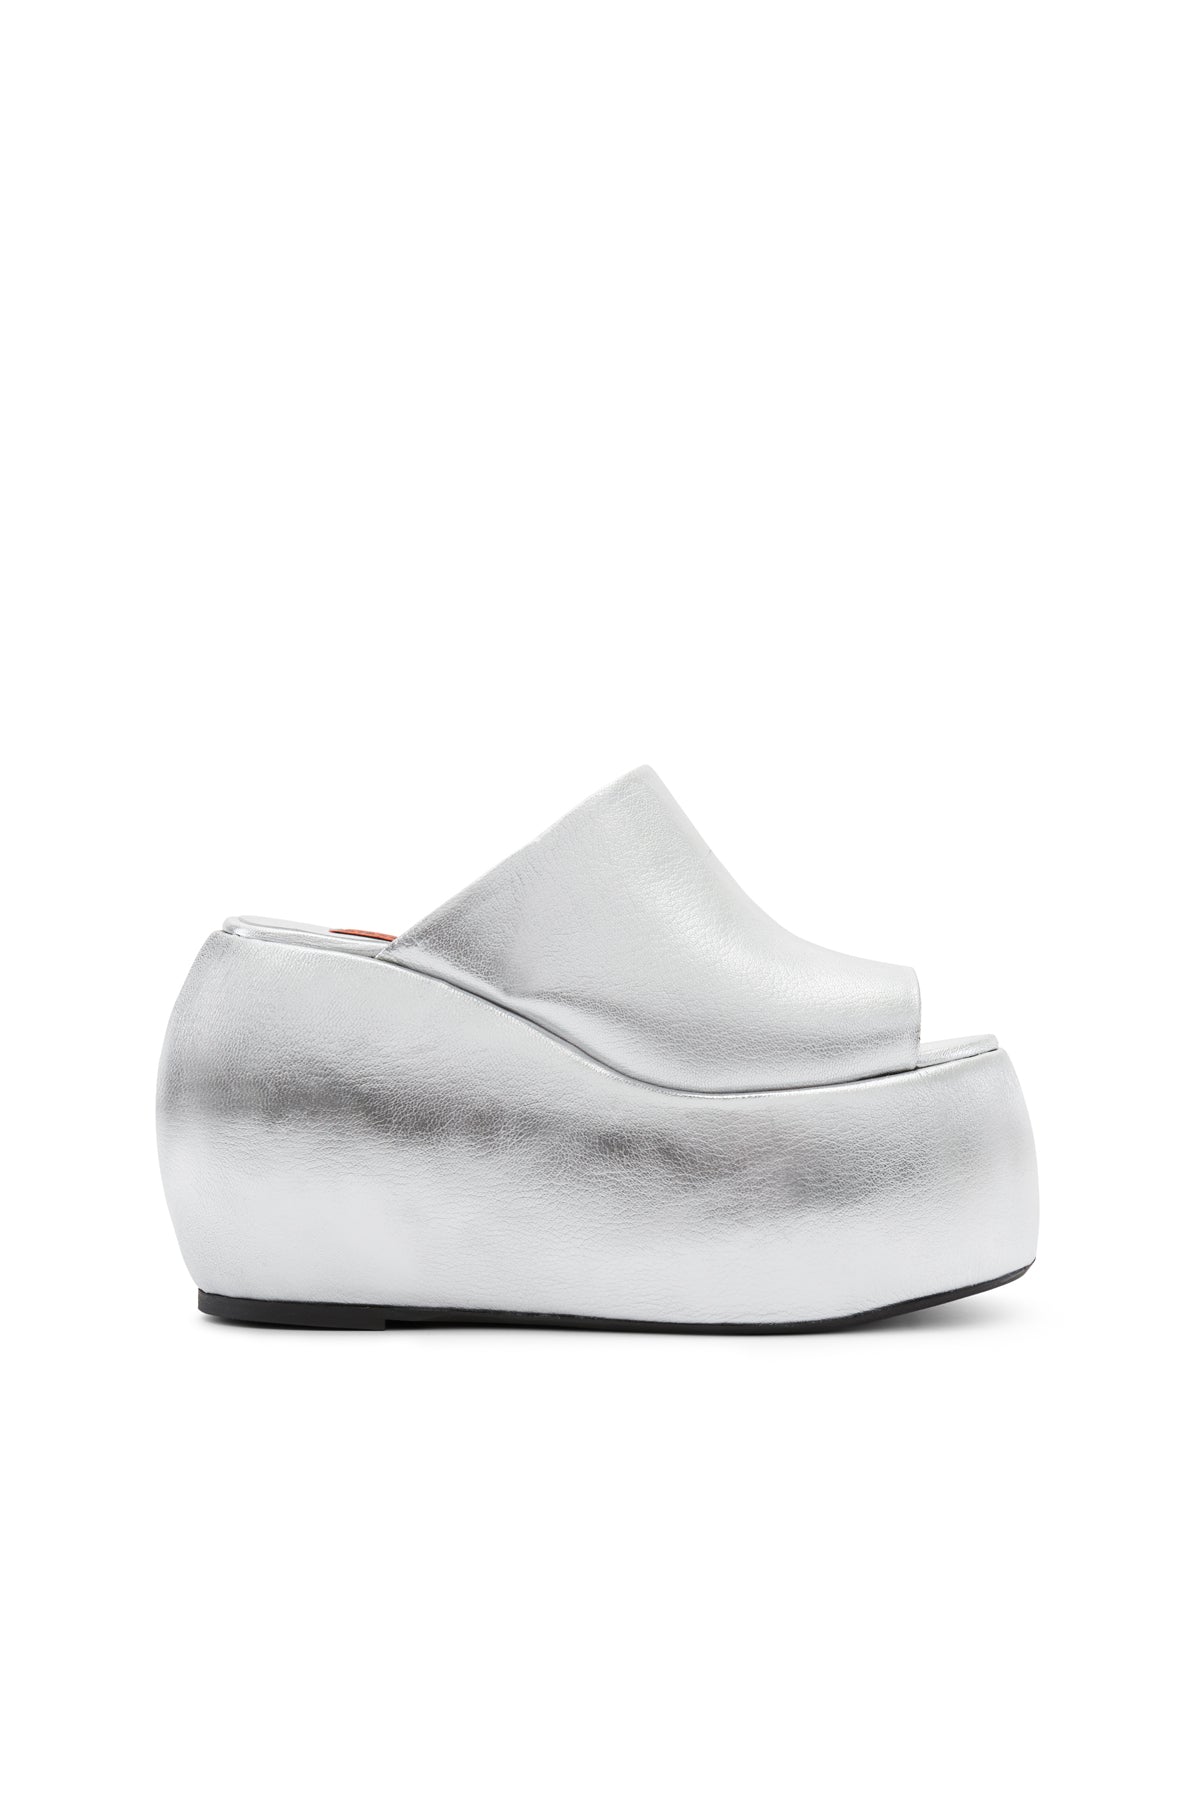 Platform Bubble Wedge in Silver